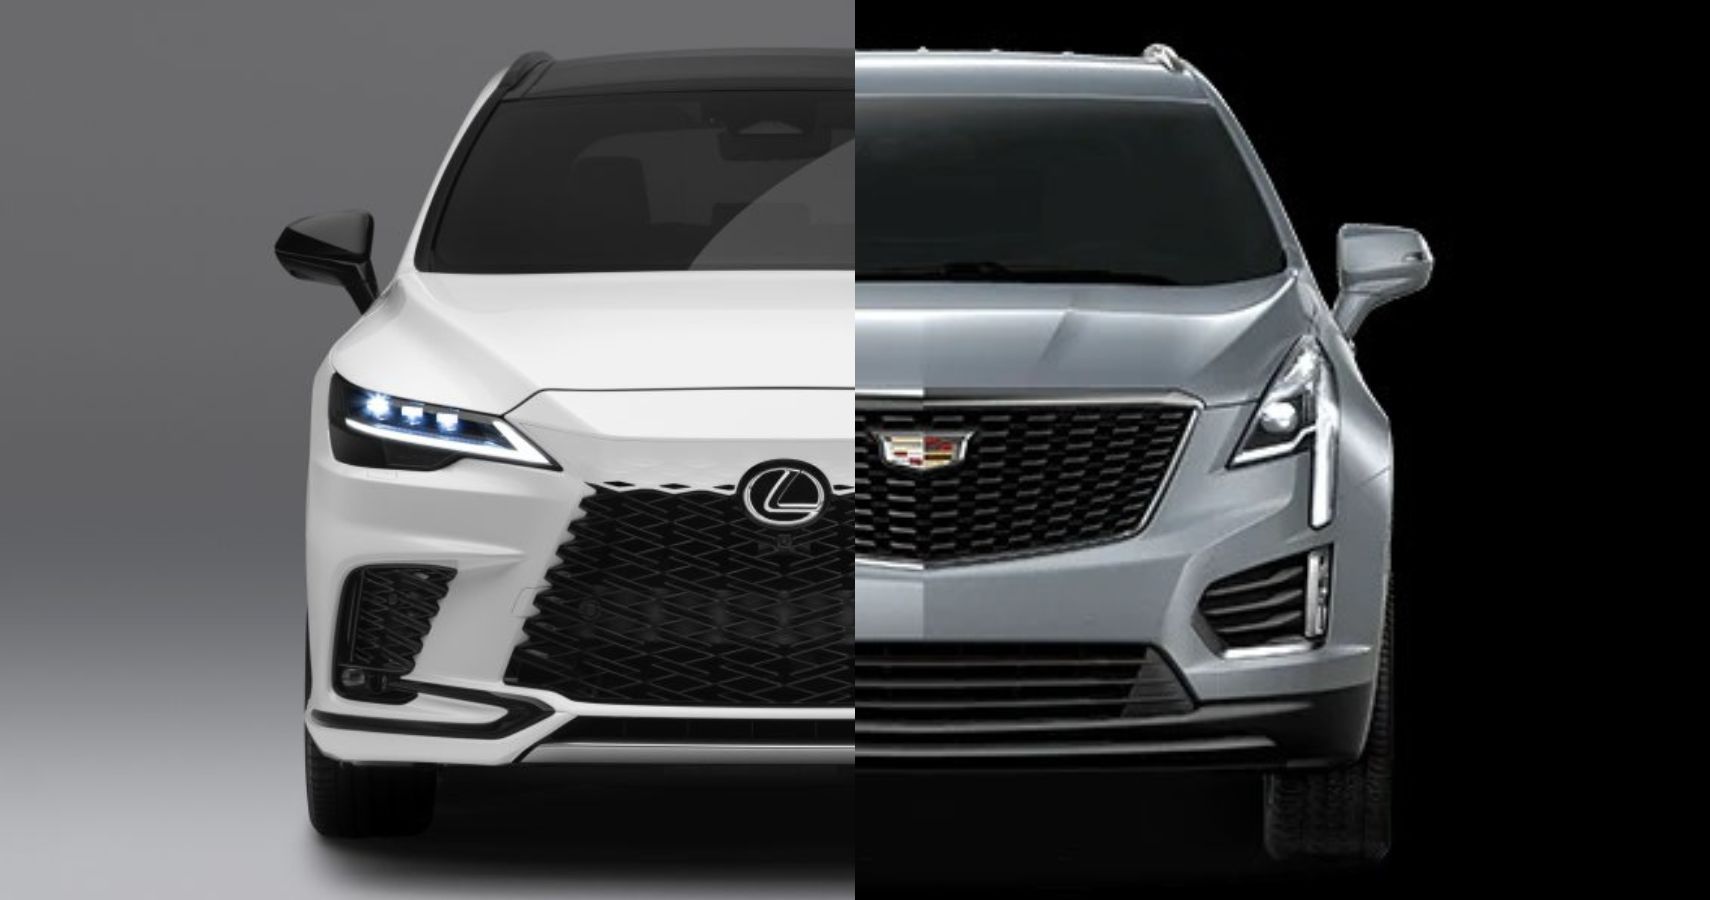 2023 Lexus RX and Cadillac XT5 Side-by-Side Front View Comparison